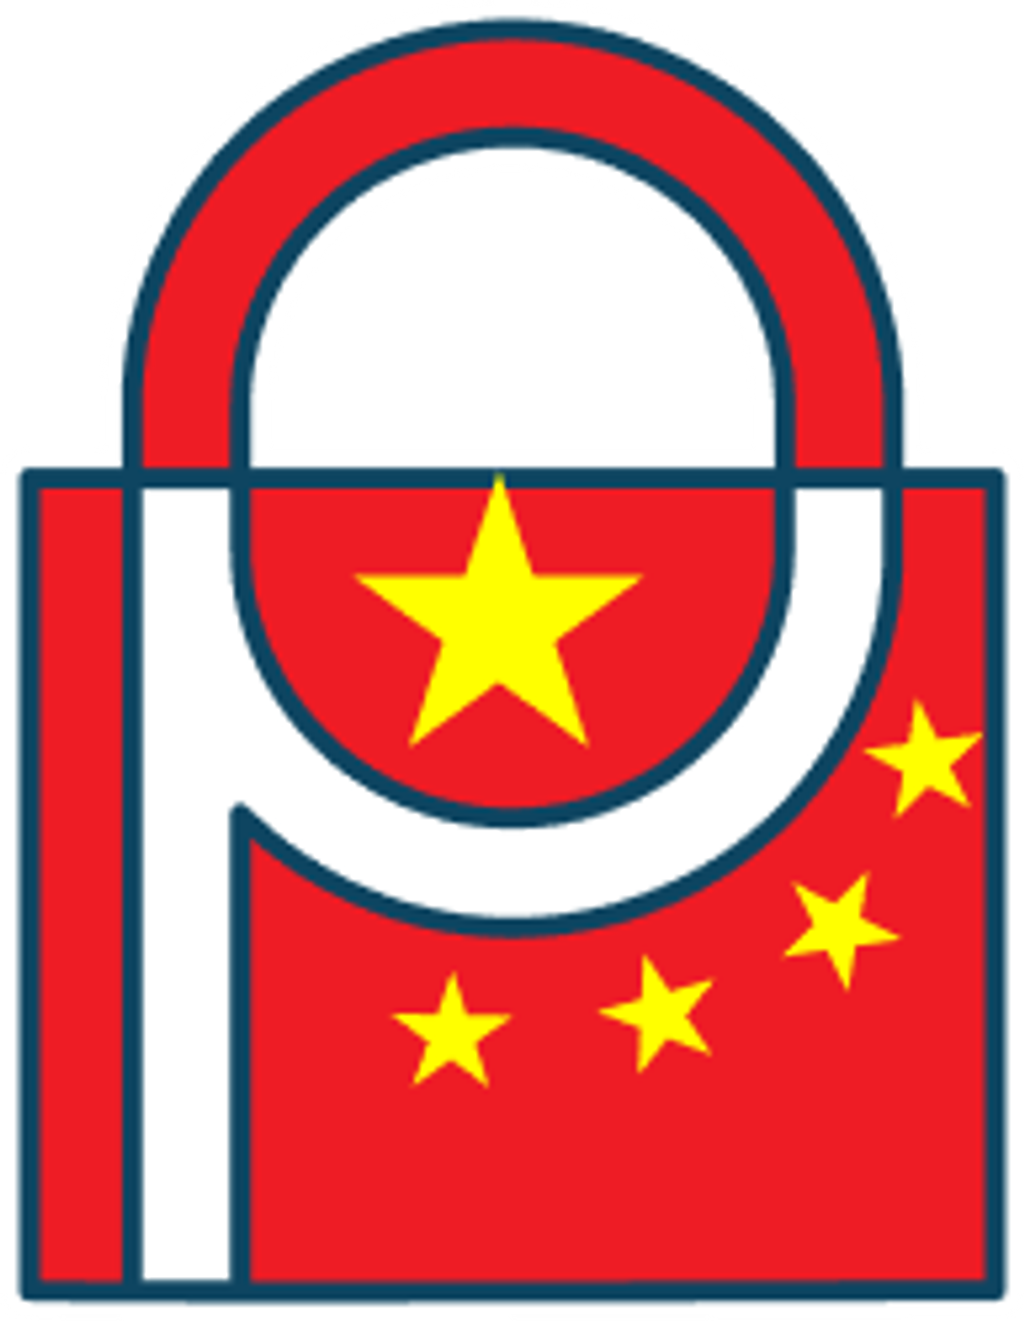 Logoin the shape of a lock representing Prighter's Chinese PIPL representation service.